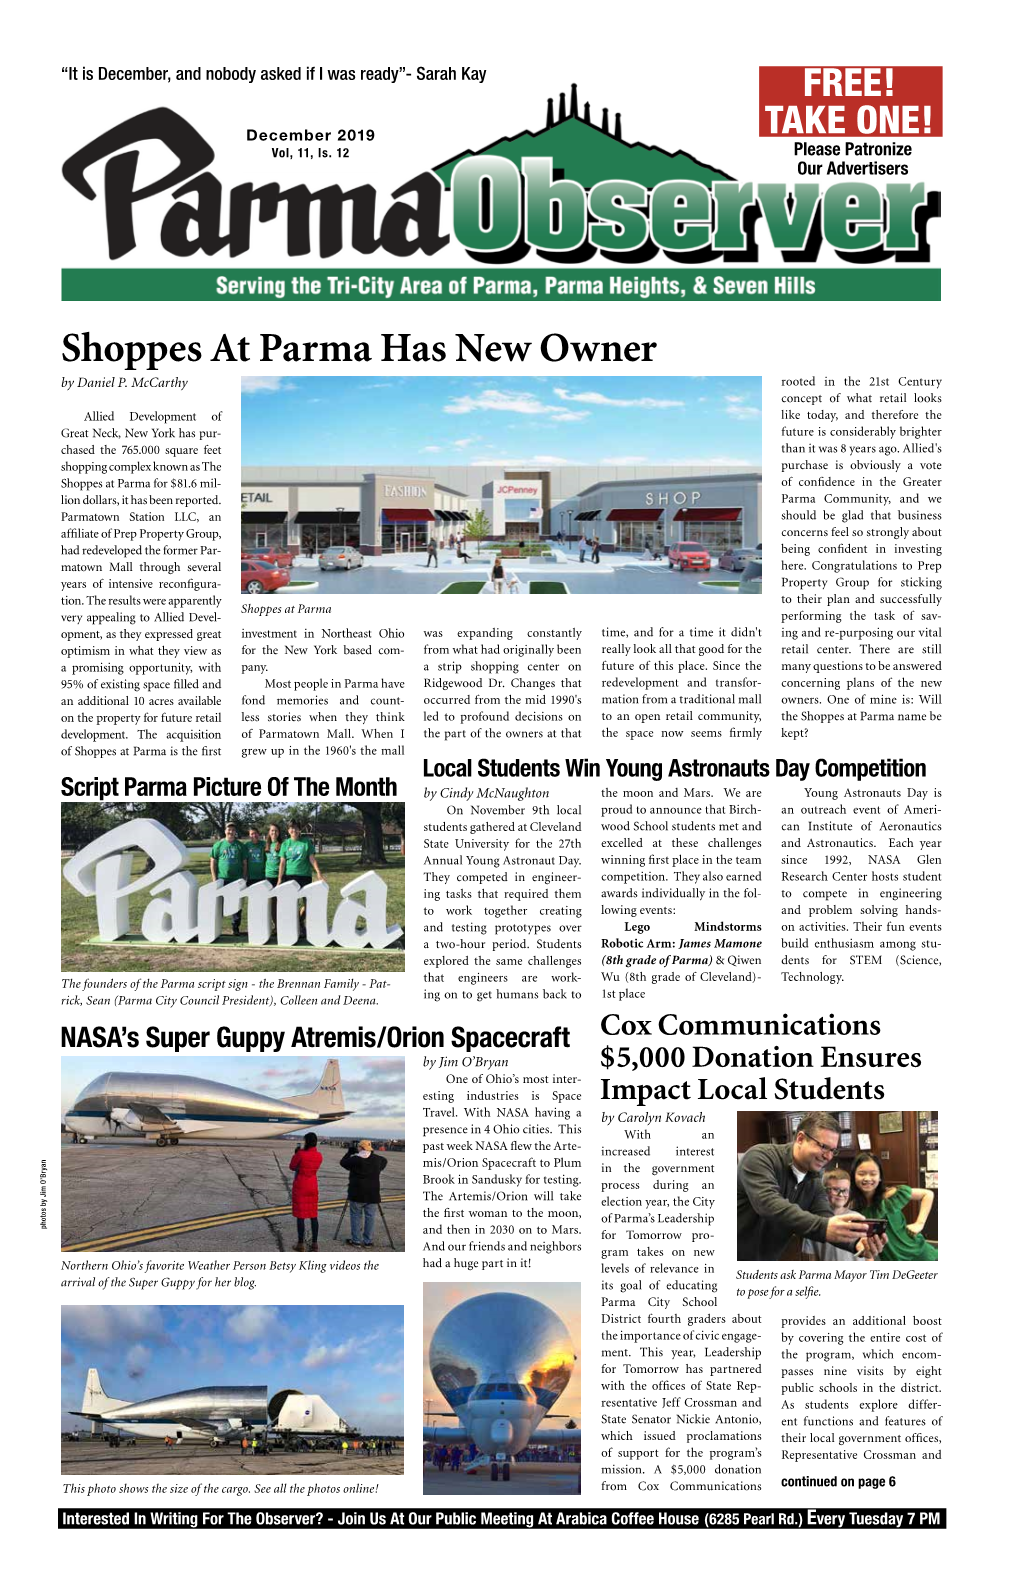 Shoppes at Parma Has New Owner by Daniel P